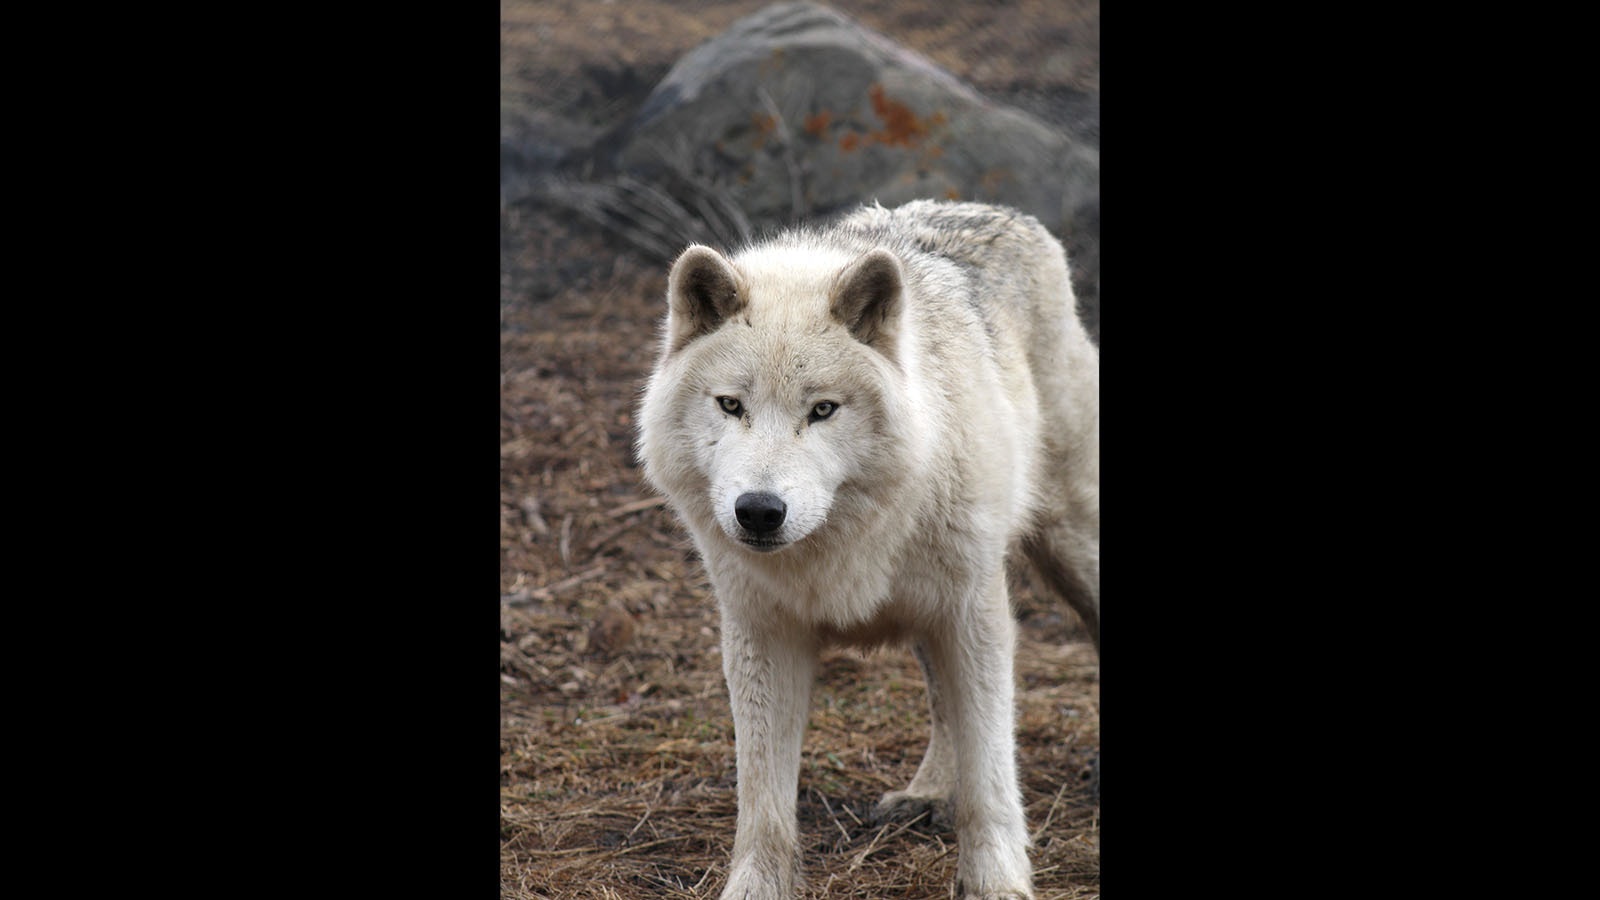 Index is a female gray wolf that arrived earlier this month at the Yellowstone Wildlife Sanctuary in Red Lodge, Montana.